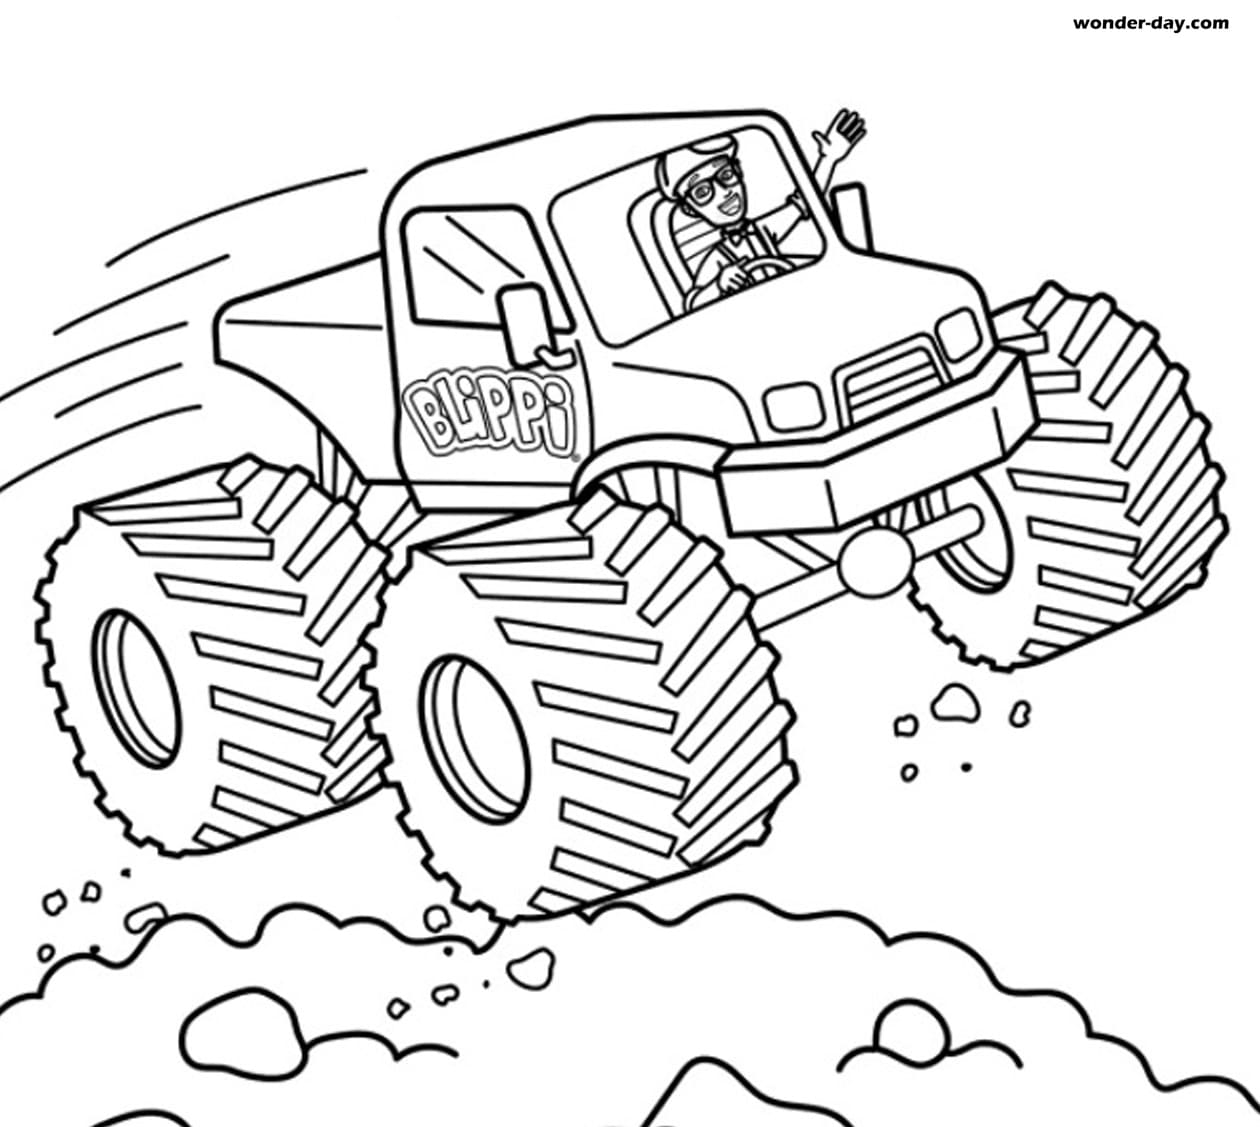 Free Printable Blippi Coloring Pages For Kids WONDER DAY Coloring